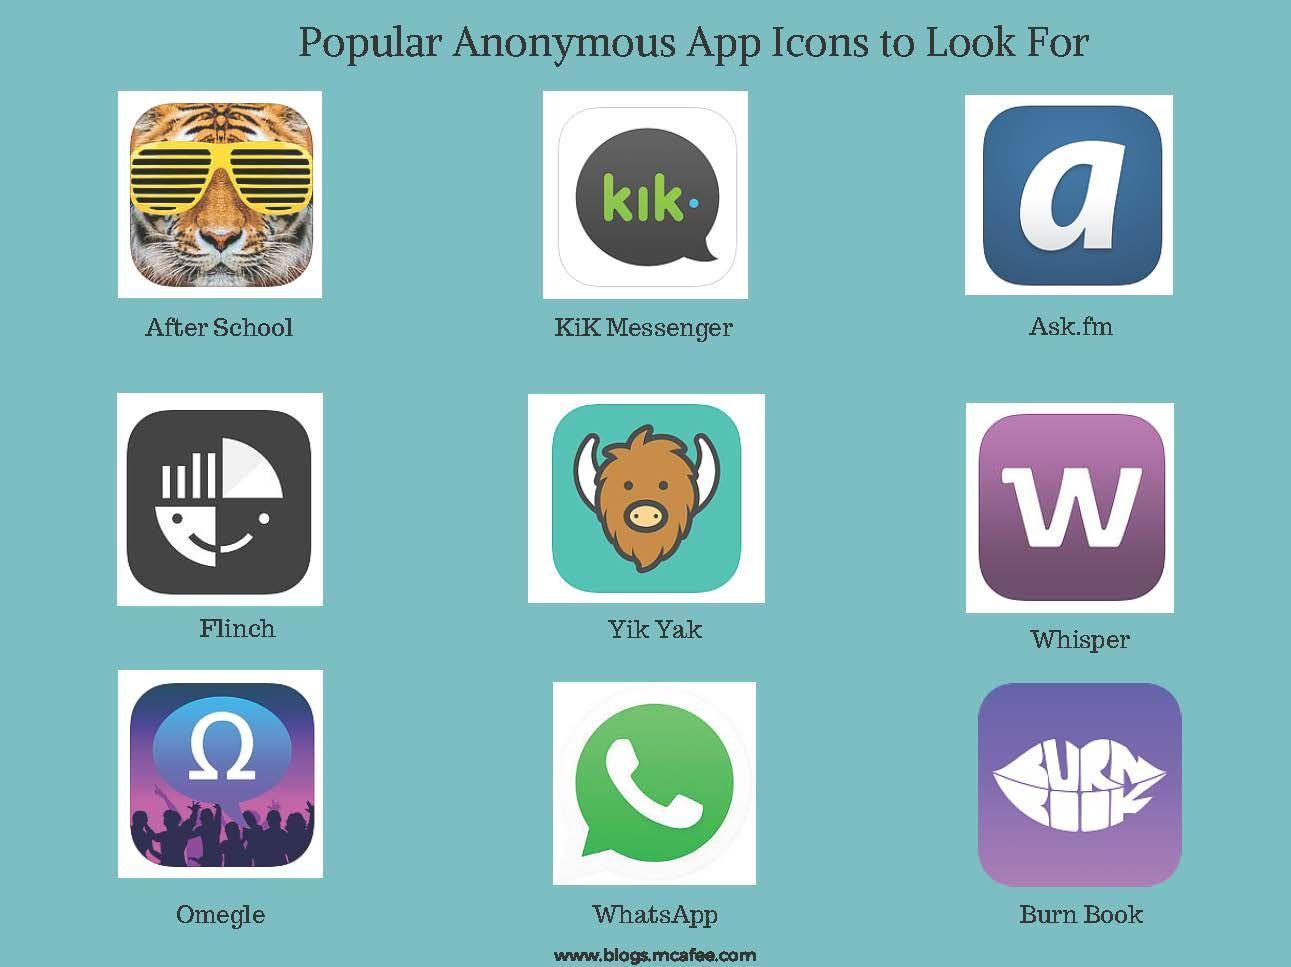 Kik Messenger App Logo - Anonymous App 'After School' Gaining Popularity with Teens | McAfee ...